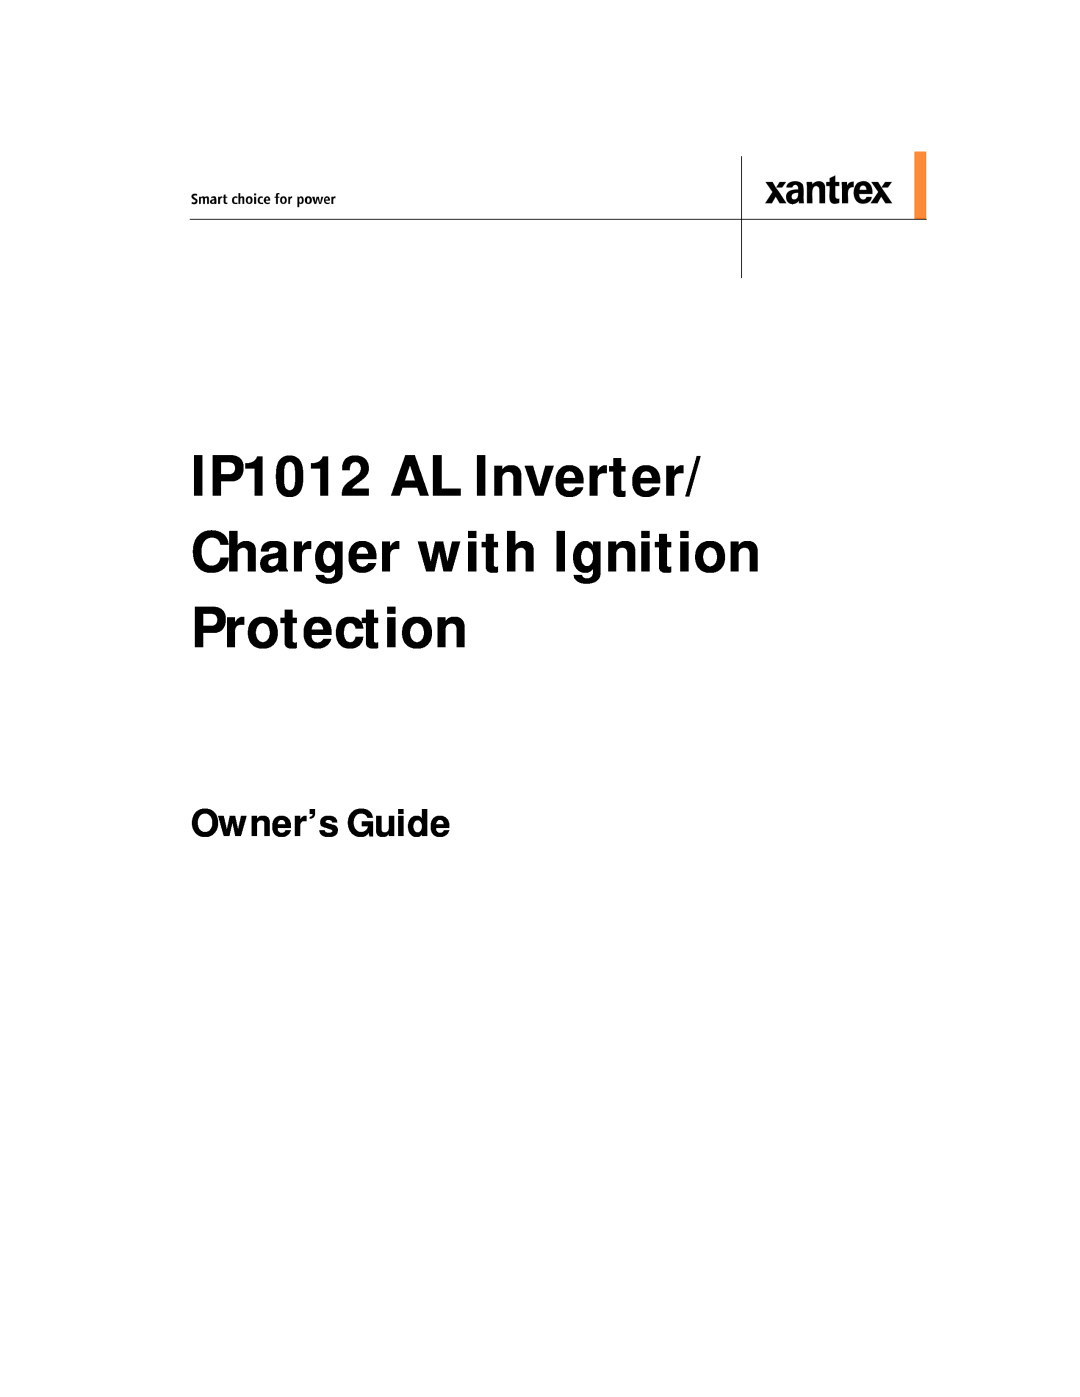 Xantrex Technology manual Owner’s Guide, IP1012 AL Inverter/ Charger with Ignition Protection 